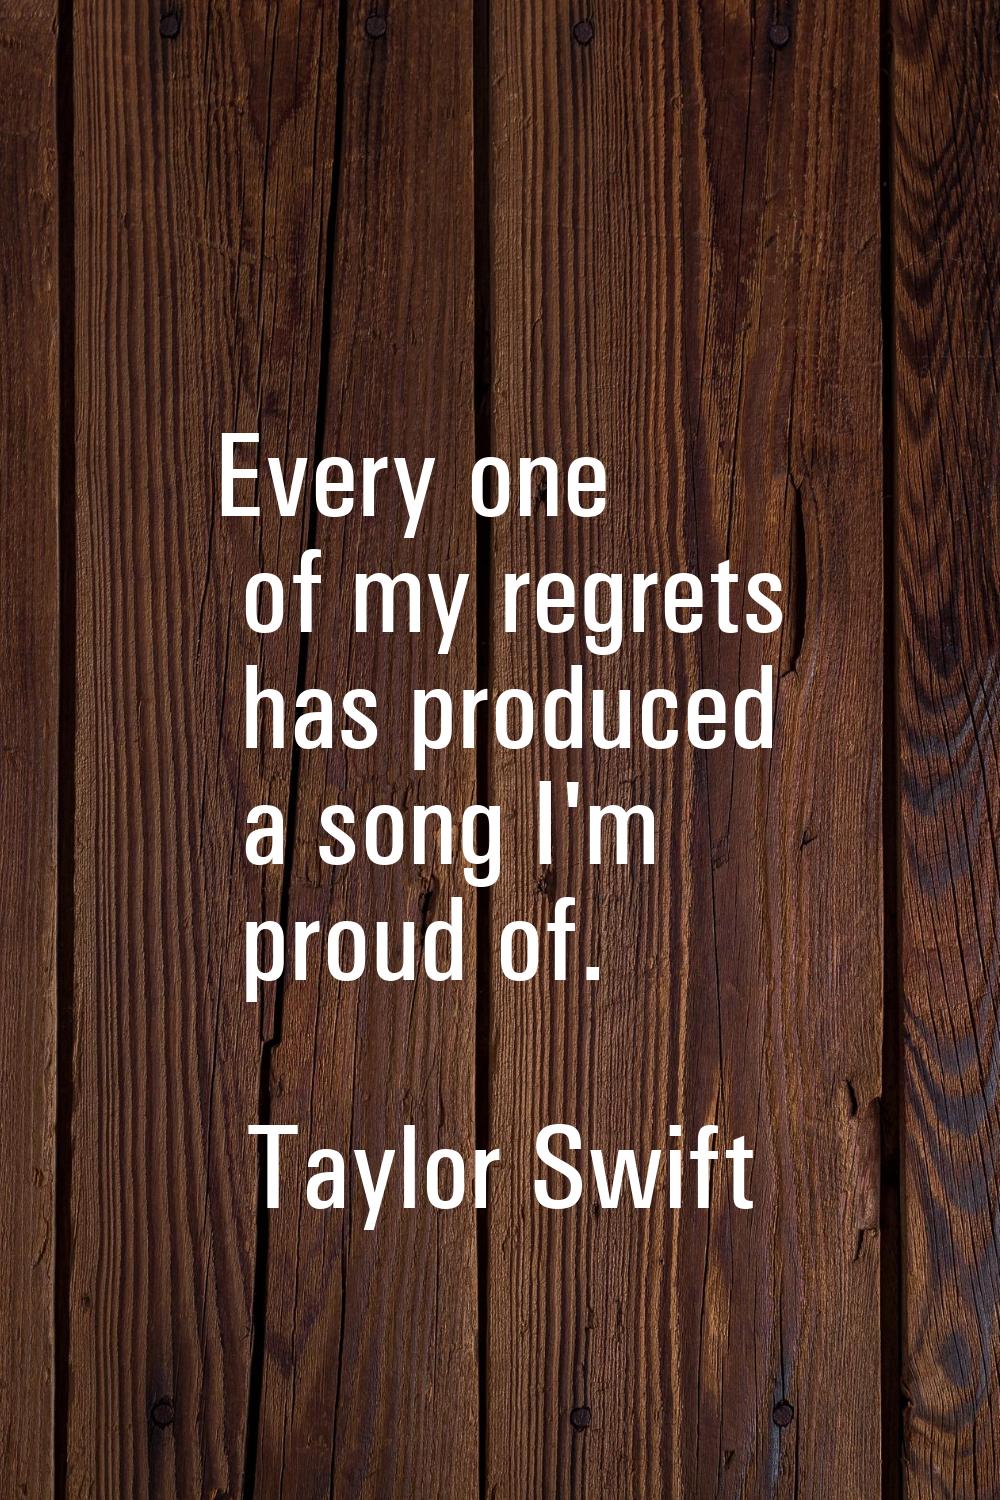 Every one of my regrets has produced a song I'm proud of.